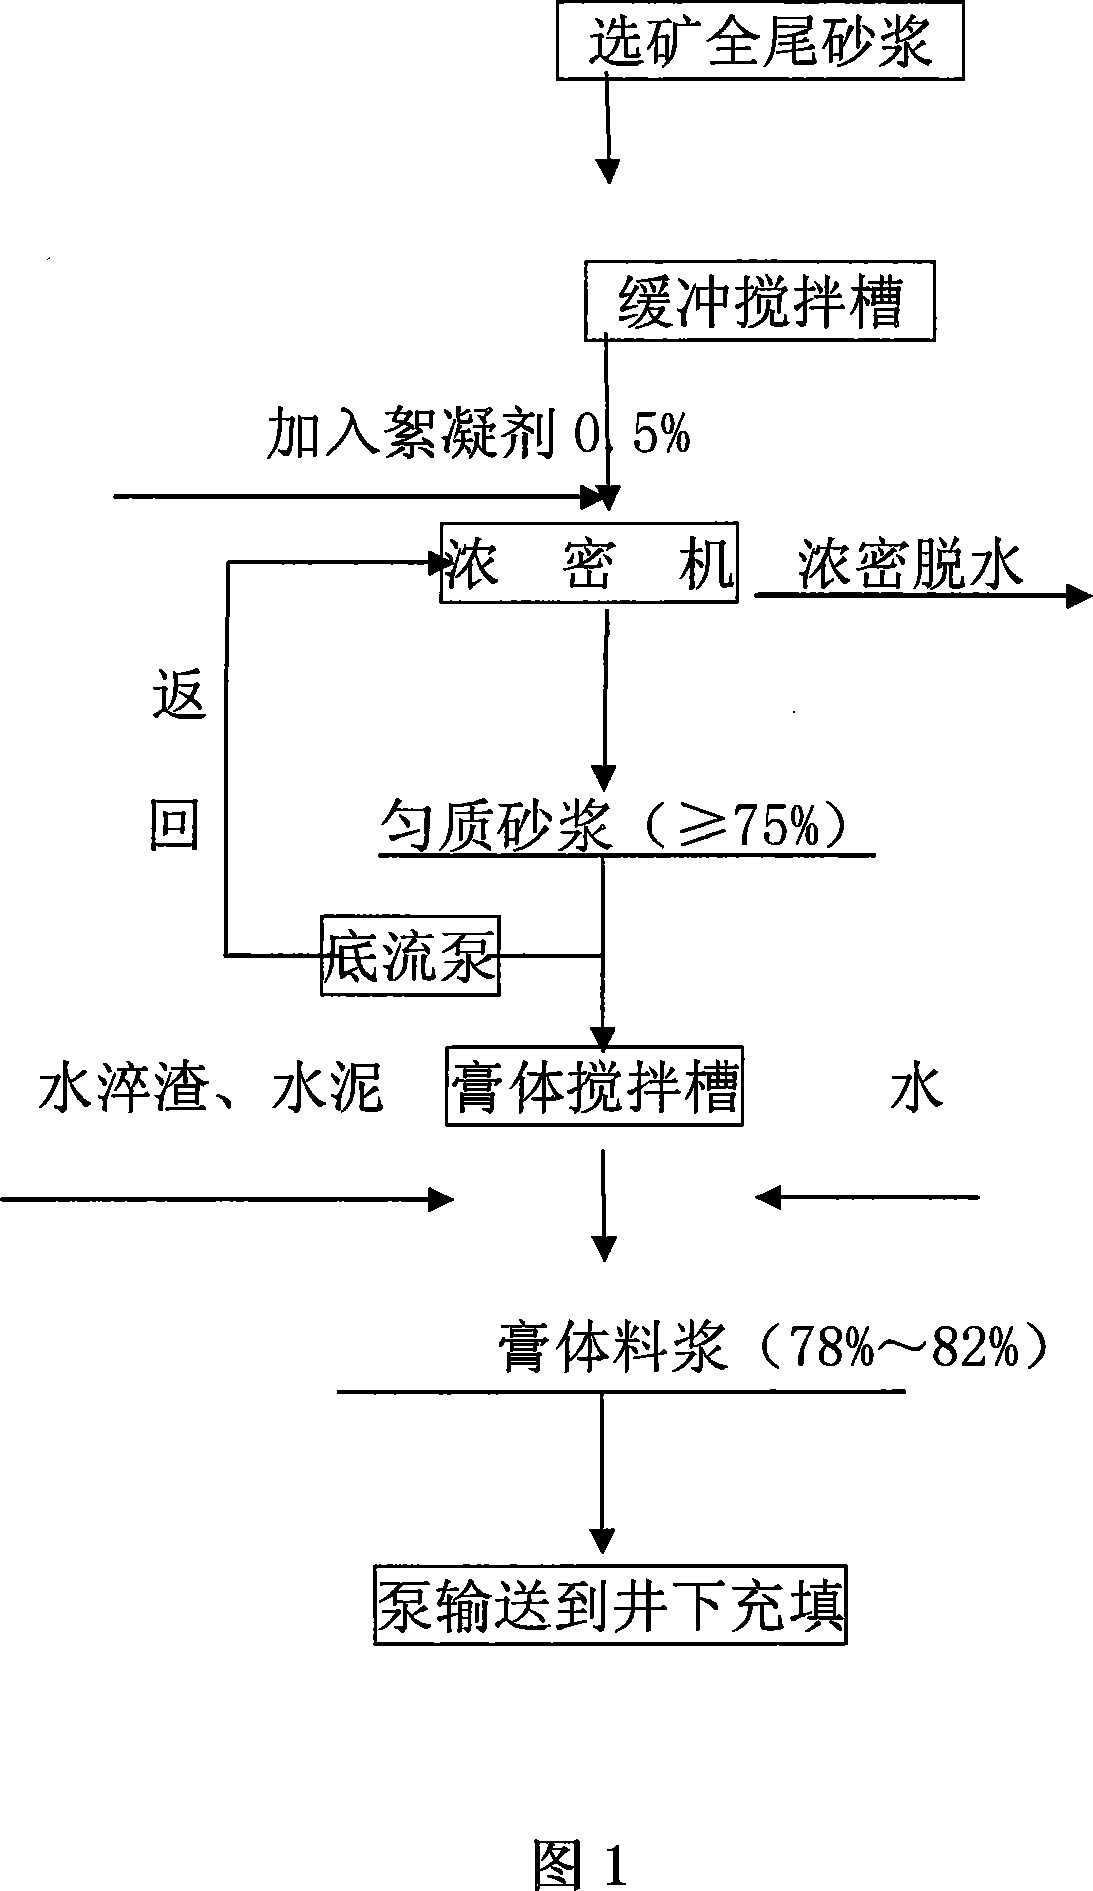 Whole tailings depth controllable homogeneous concentration method